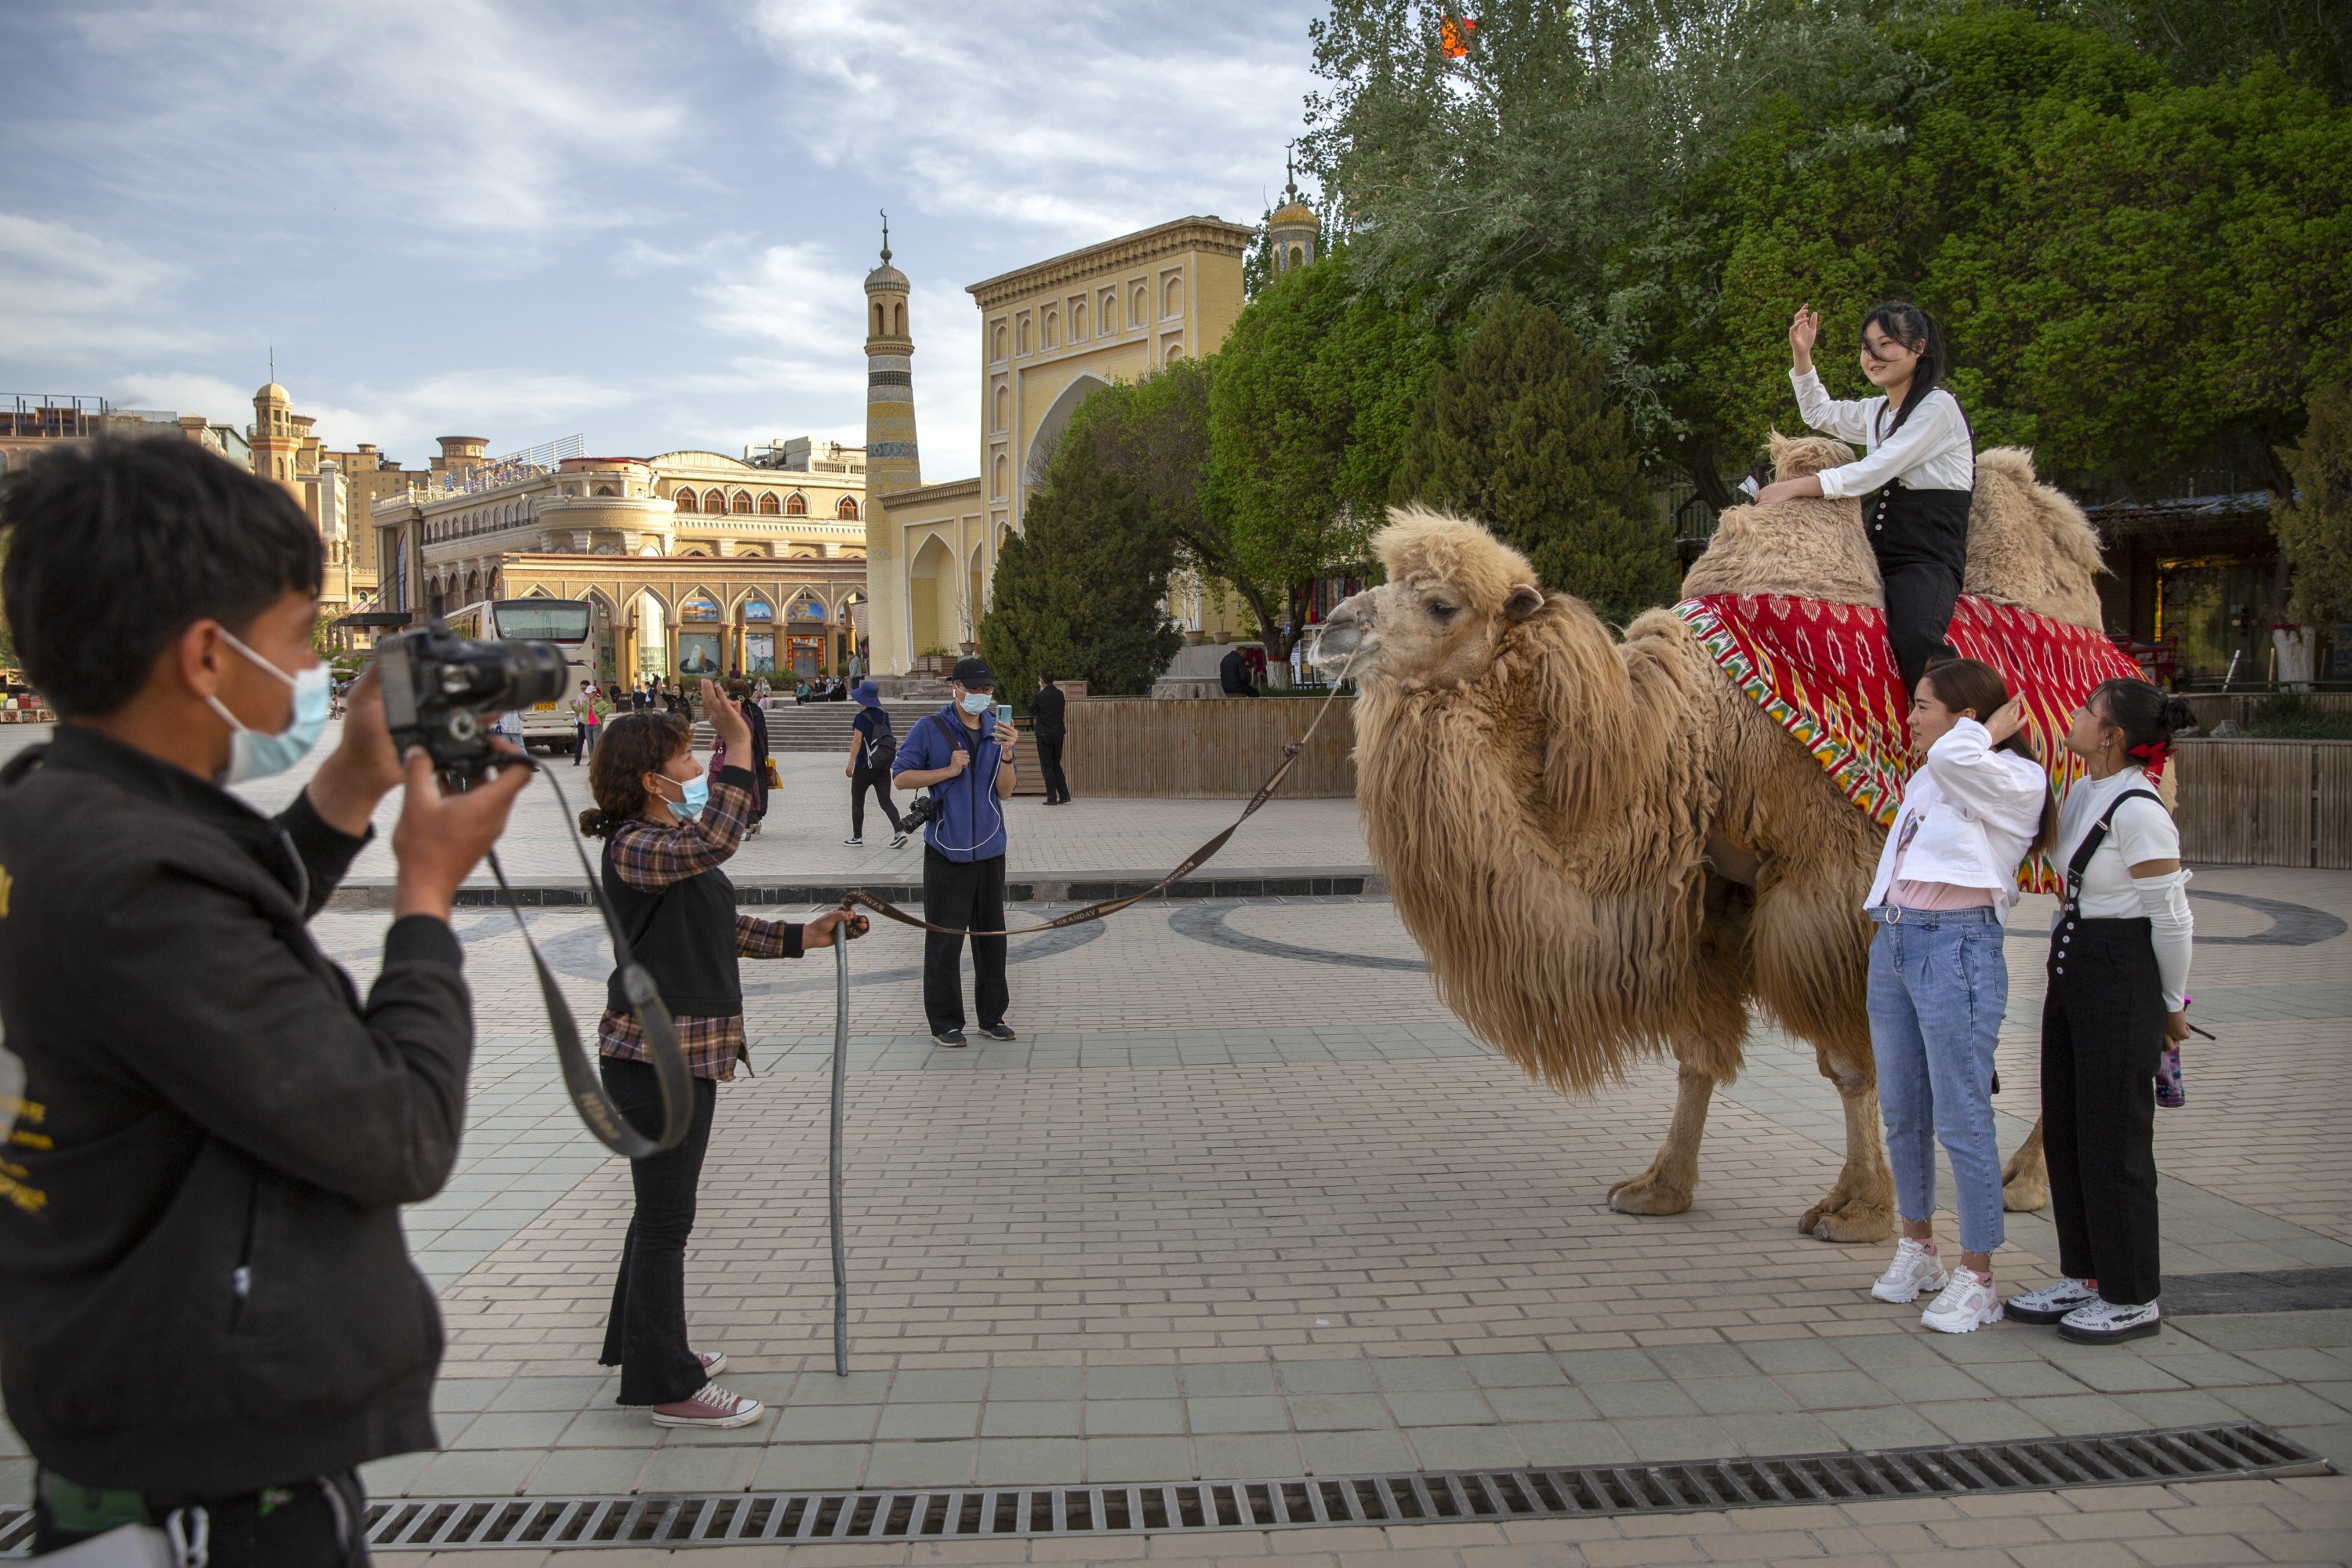 Tourists pose for photos as one of them sits atop a camel outside the Id Kah Mosque in Kashgar, Xinjiang Uyghur Autonomous Region, China, April 19, 2021. (AP Photo)